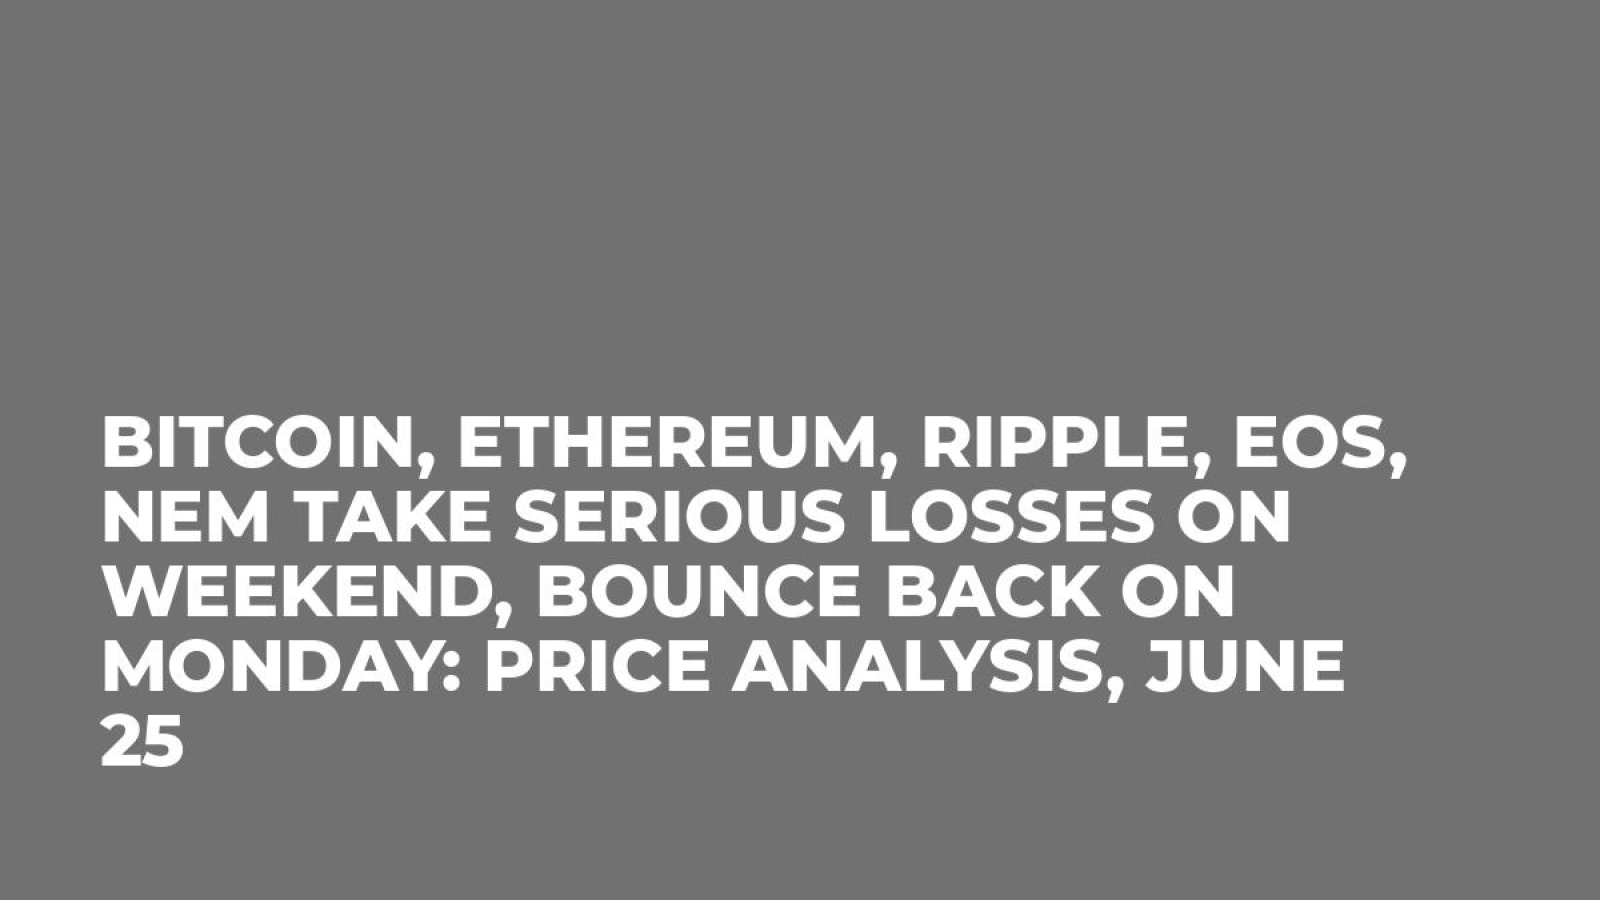 Bitcoin, Ethereum, Ripple, EOS, NEM Take Serious Losses On Weekend, Bounce Back on Monday: Price Analysis, June 25